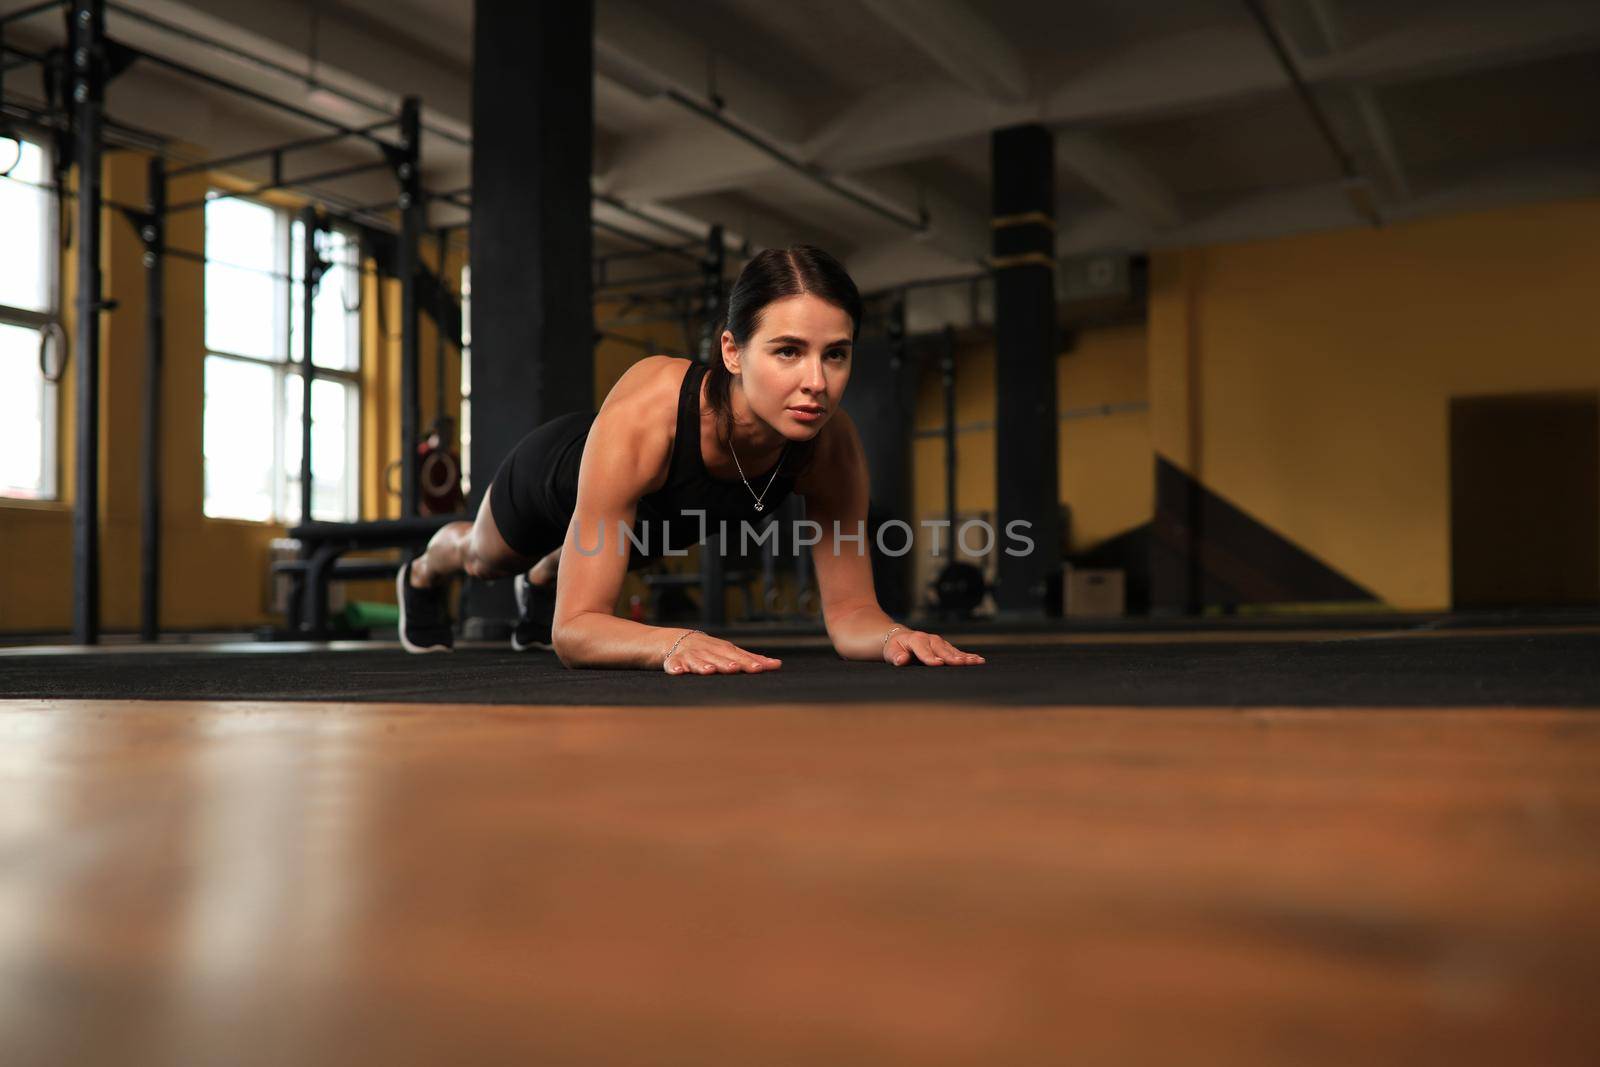 Portrait of a muscular woman on a plank position